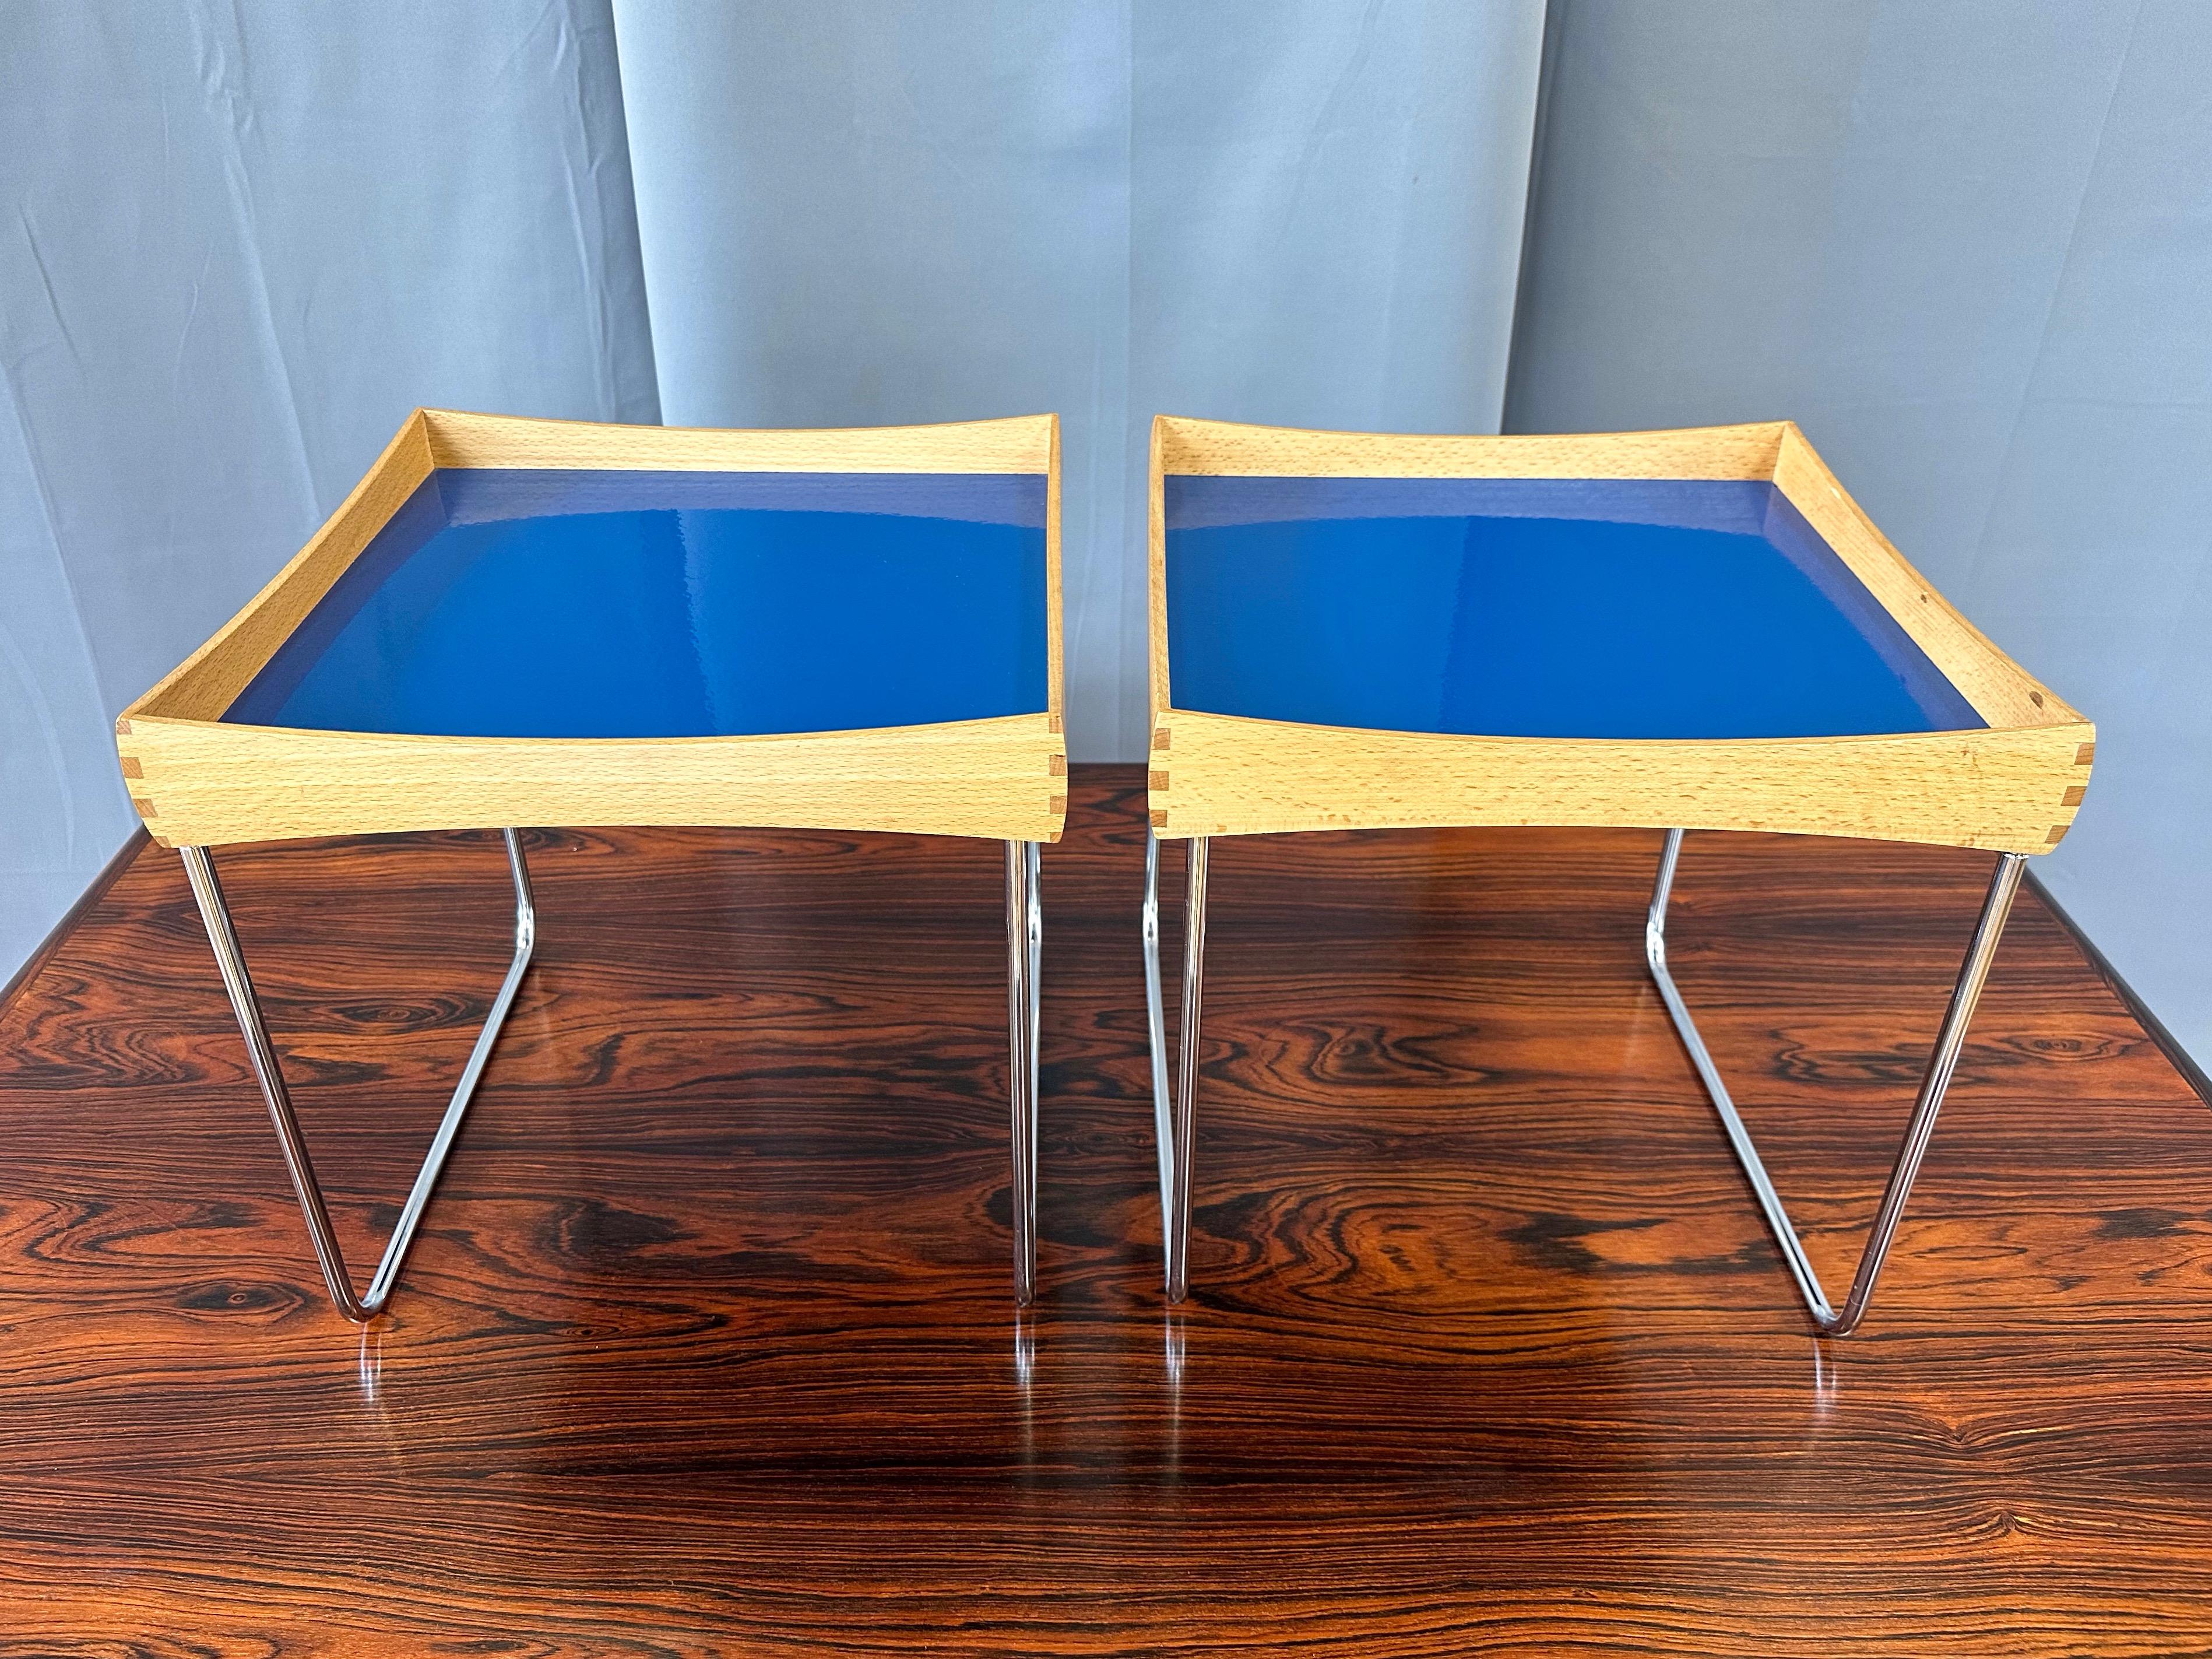 Enameled Pair of Hermann Bongard for Plus Conform Tray Tables in Beech and Blue, 1961